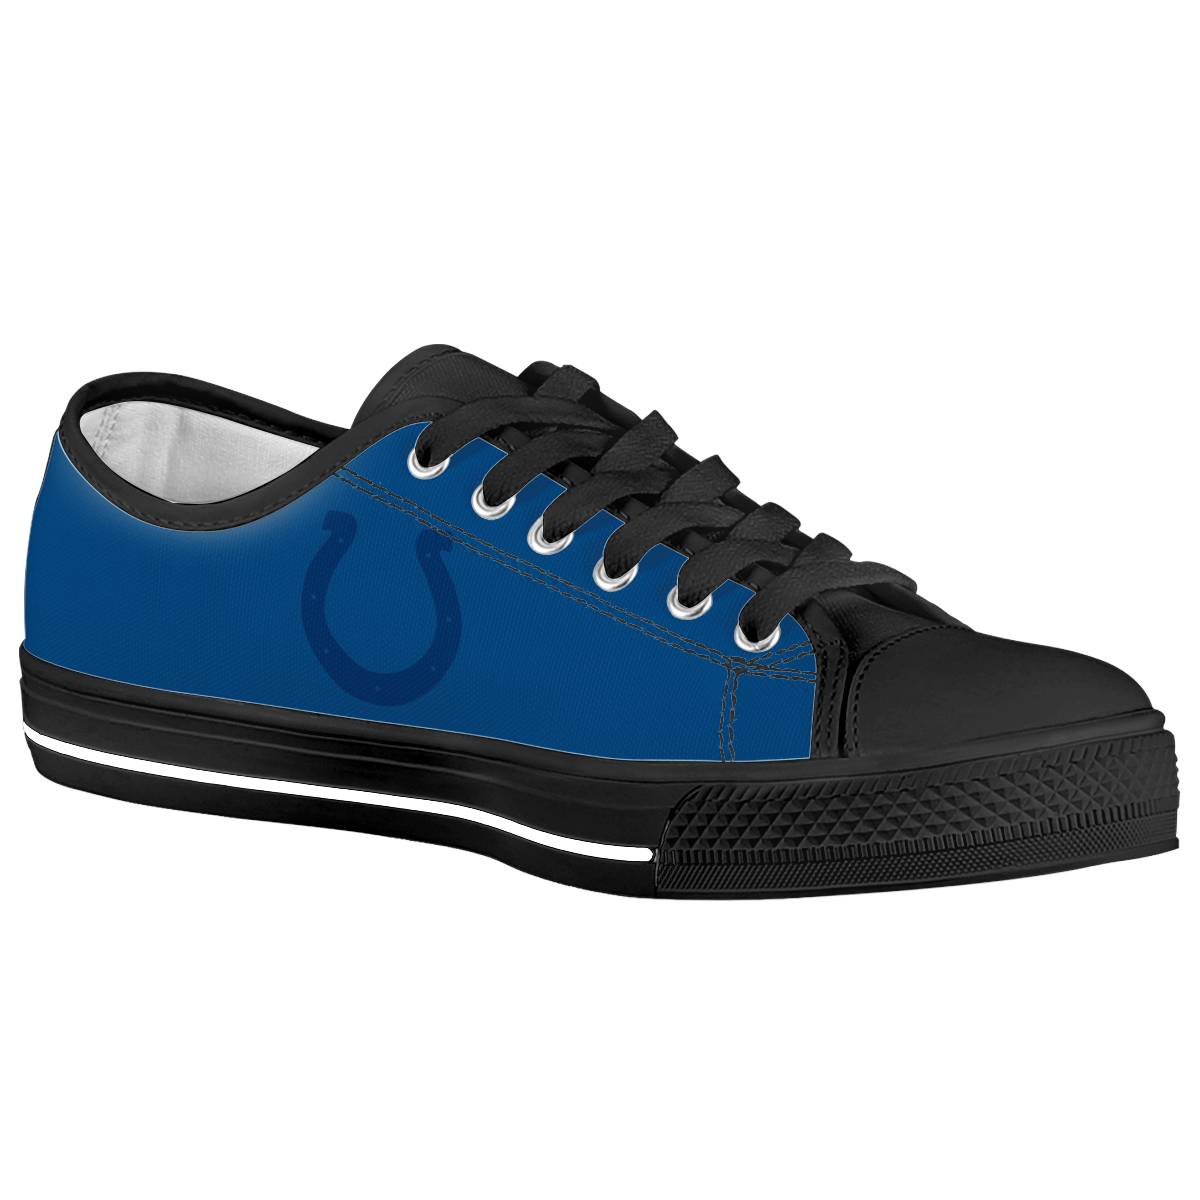 Women's Indianapolis Colts Low Top Canvas Sneakers 002